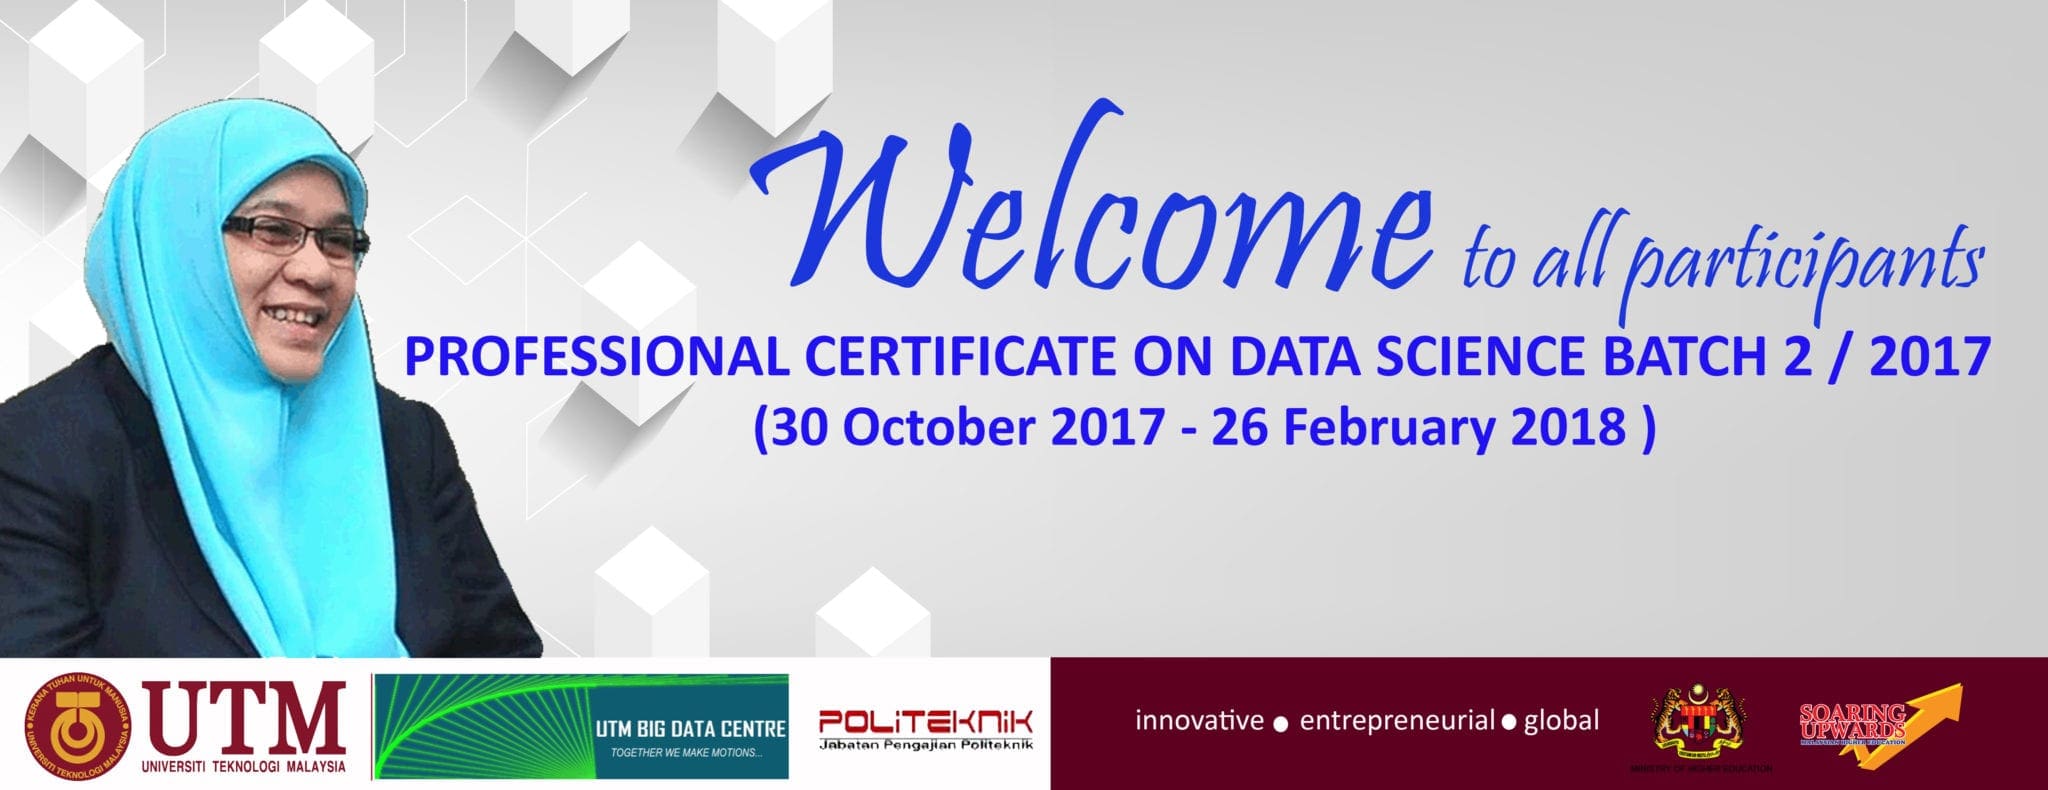 30 October 2017 : Welcoming to all participants for Professional Certificate on Data Science Batch 2/2017